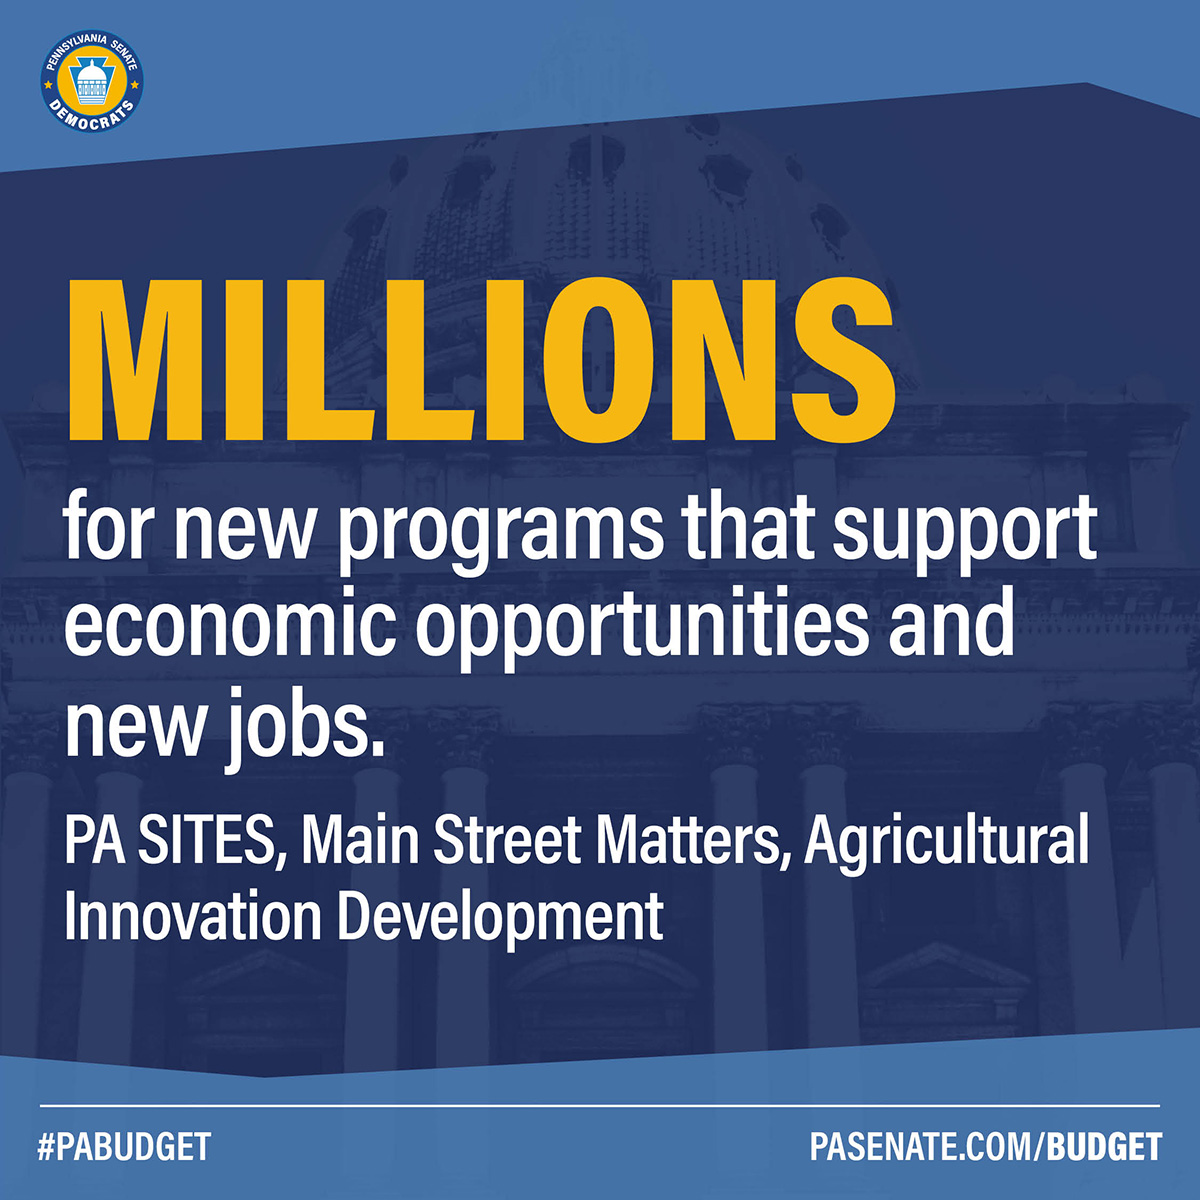 Millions for new programs that support economic opportunities and new jobs - PA SITES, Main Street Matters, Agricultural Innovation Development